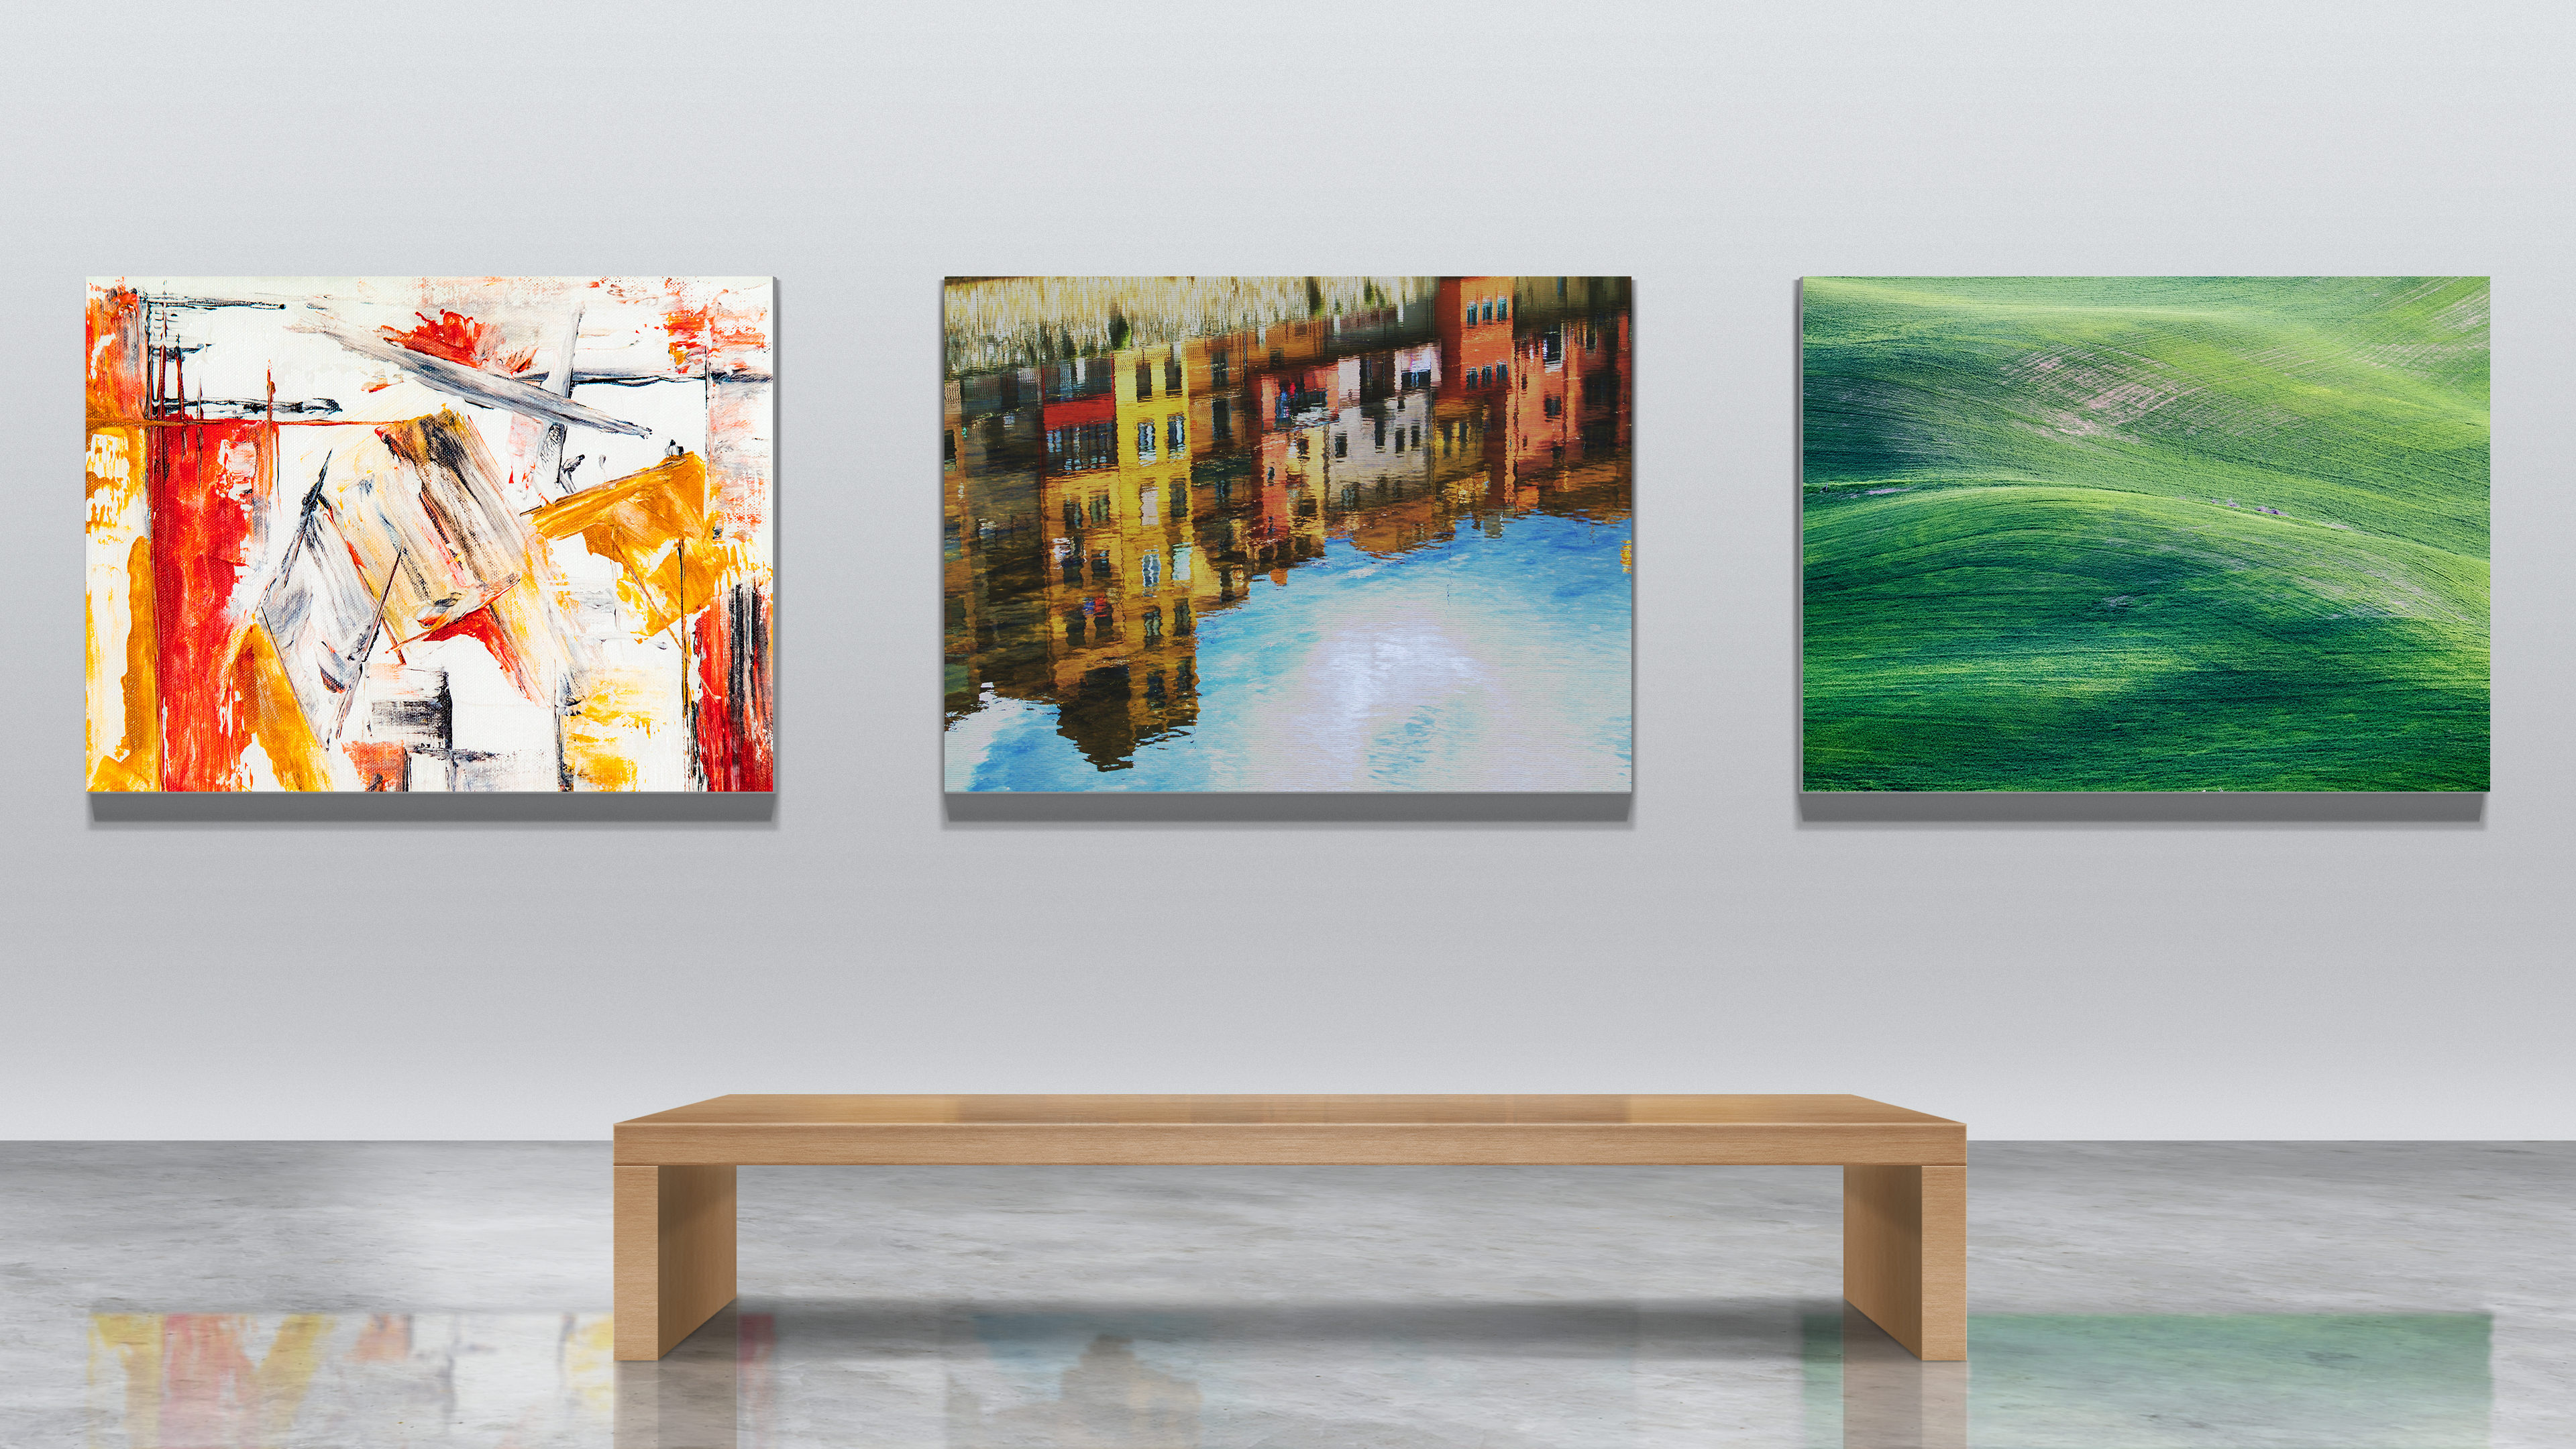 General 3840x2160 art gallery painting wall bench picture frames museum canvas abstract landscape picture